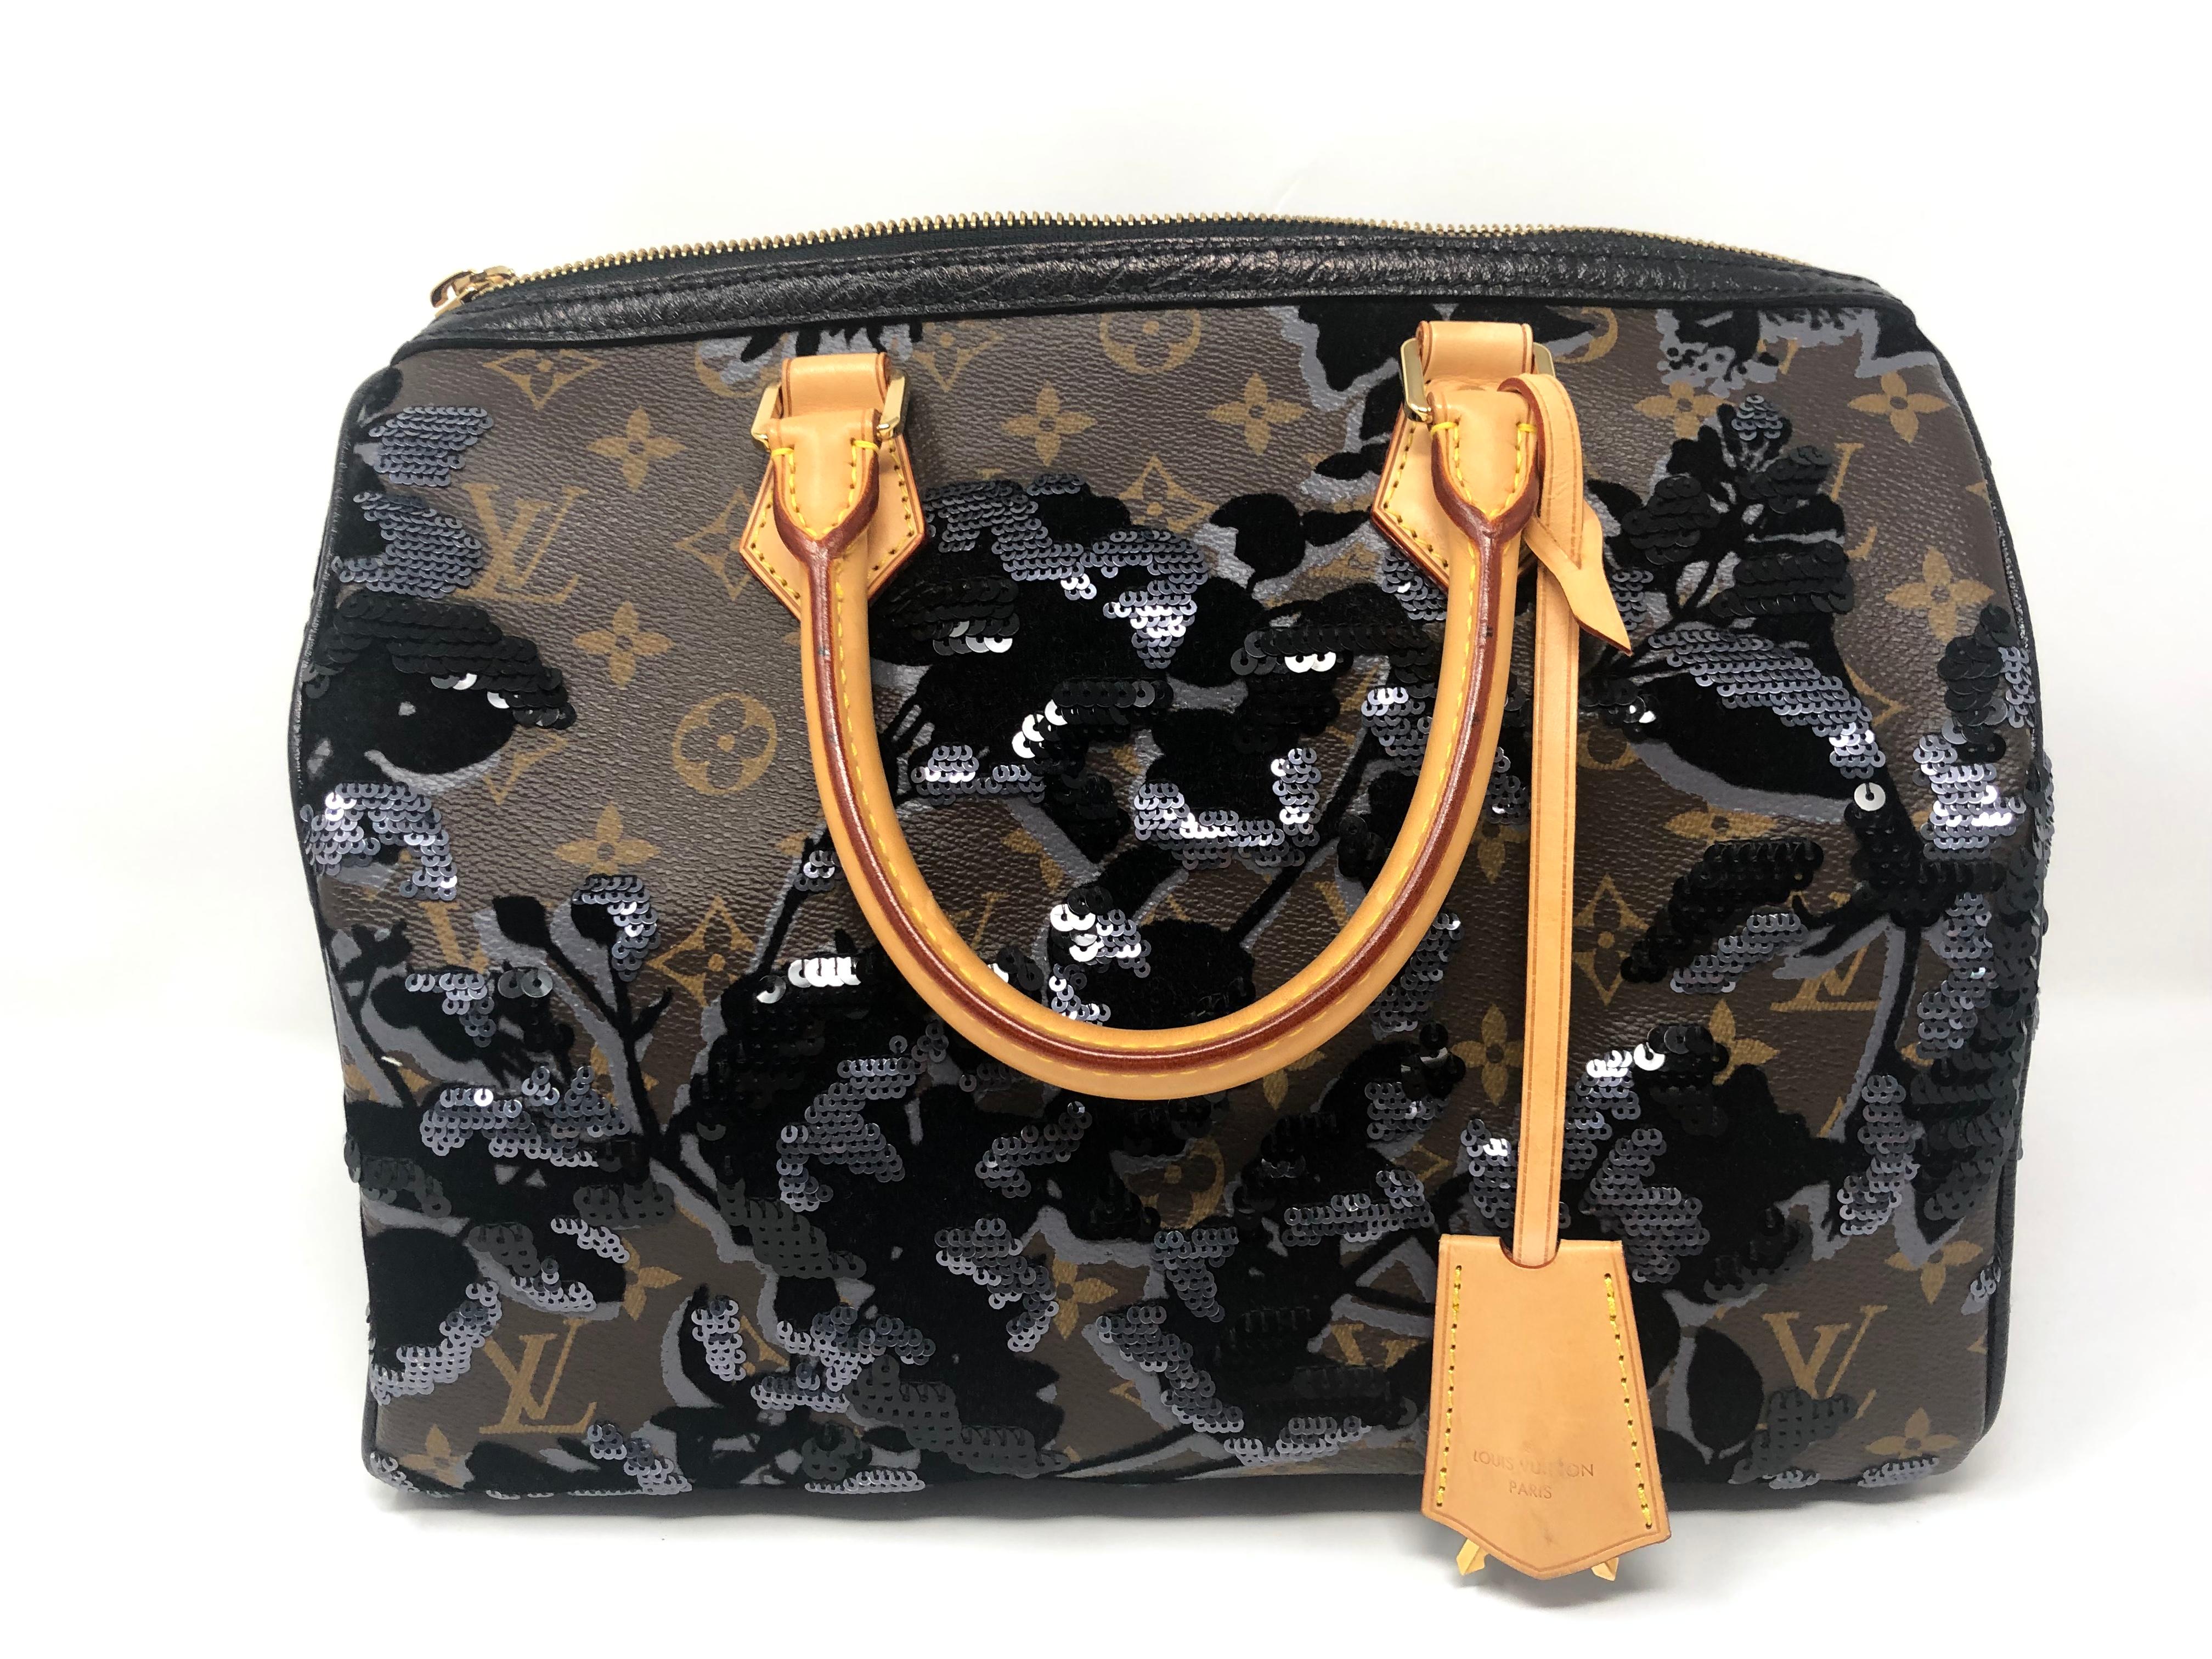 Louis Vuitton Fleur De Jais Sequin Speedy 30. Coated monogram canvas with velvet, sequins, and leather to adorn this classic speedy bag. Rare and limited. Very good condition. Includes lock, key, clochette, and dust cover. A true collector's piece.